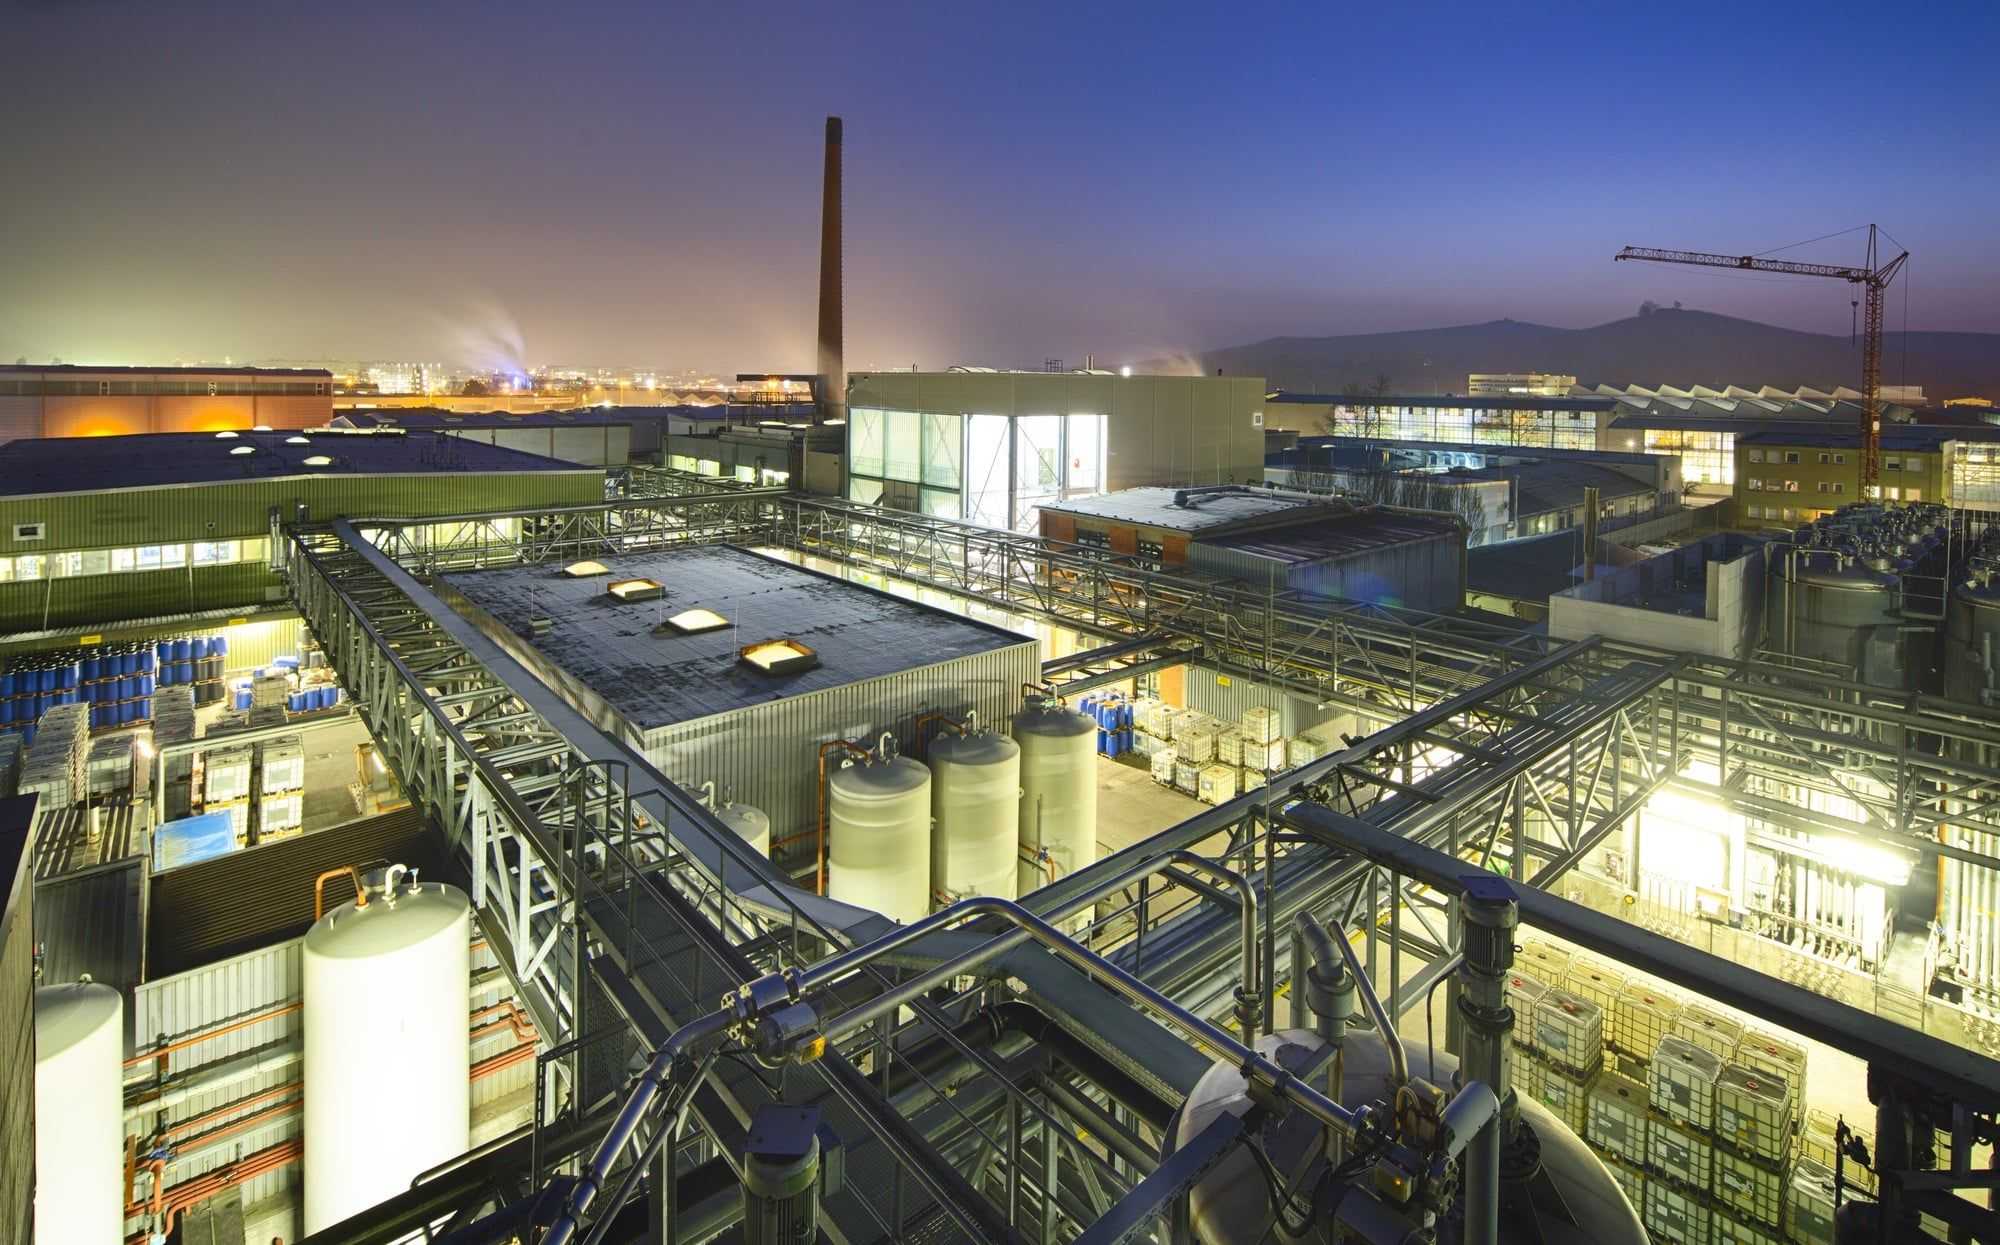 <p>MÜNZING CHEMIE GmbH was founded at this site in 1830. As the company expanded, the office buildings were spun off in 2014, but Heilbronn is still one of our most important production sites worldwide, with an annual output of approx. 25,000 tons.</p><p><br></p><p>In addition to production, the associated analytics, sample department, production planning, internal logistics as well as maintenance, and the project department are located here.</p><p><br></p><p>Around 600 different products from the series AGITAN®, AGITAN® DF, AGITAN® P, DEE FO®, EDAPLAN®, FENTAK®, FOAM BAN®, LUBA-print®, LUBARIT®, METOLAT®, METOLAT® P, OMBRELUB, TAFIGEL®, and UMBRELLIT are produced with annual quantities of 500 kg to 1000 tons.</p><p><br></p><p>These are defoamers, dispersants, wetting agents and leveling additives, thickeners, wax emulsions, powder defoamers and additives for wood processing. At the site, mixtures, esterifications, neutralizations, sulfations, polymerizations, hydrosilylations, bisulfite additions and various methods for homogenizing emulsions and dispersions under pressure or under atmospheric conditions are carried out in 6 production areas that are largely designed for the handling of flammable substances. A large number of reactors in the range of 70l - 27,000 l with associated tank farms, a cooling and heating system from -10 °C to 240 °C and a team of 85 employees are available, who work continuously to meet the requirements of our customers.</p><p><br></p><p><a href="/documents/Information_fuer_die_Oeffentlichkeit_nach_%C2%A7_8a_der_Stoerfallverordnung_2021-08-31.pdf" rel="noopener noreferrer" target="_blank" style="background-color: rgb(247, 247, 247);">Information</a><a href="/documents/49_Information für die Öffentlichkeit nach § 8a der Störfallverordnung_2022-10-31.pdf" rel="noopener noreferrer" target="_blank"> </a><a href="/documents/49_Information für die Öffentlichkeit nach § 8a der Störfallverordnung_2022-10-31.pdf" rel="noopener noreferrer" target="_blank" style="background-color: rgb(247, 247, 247);">to the public in accordance with § 8a Störfallverordnung</a></p>